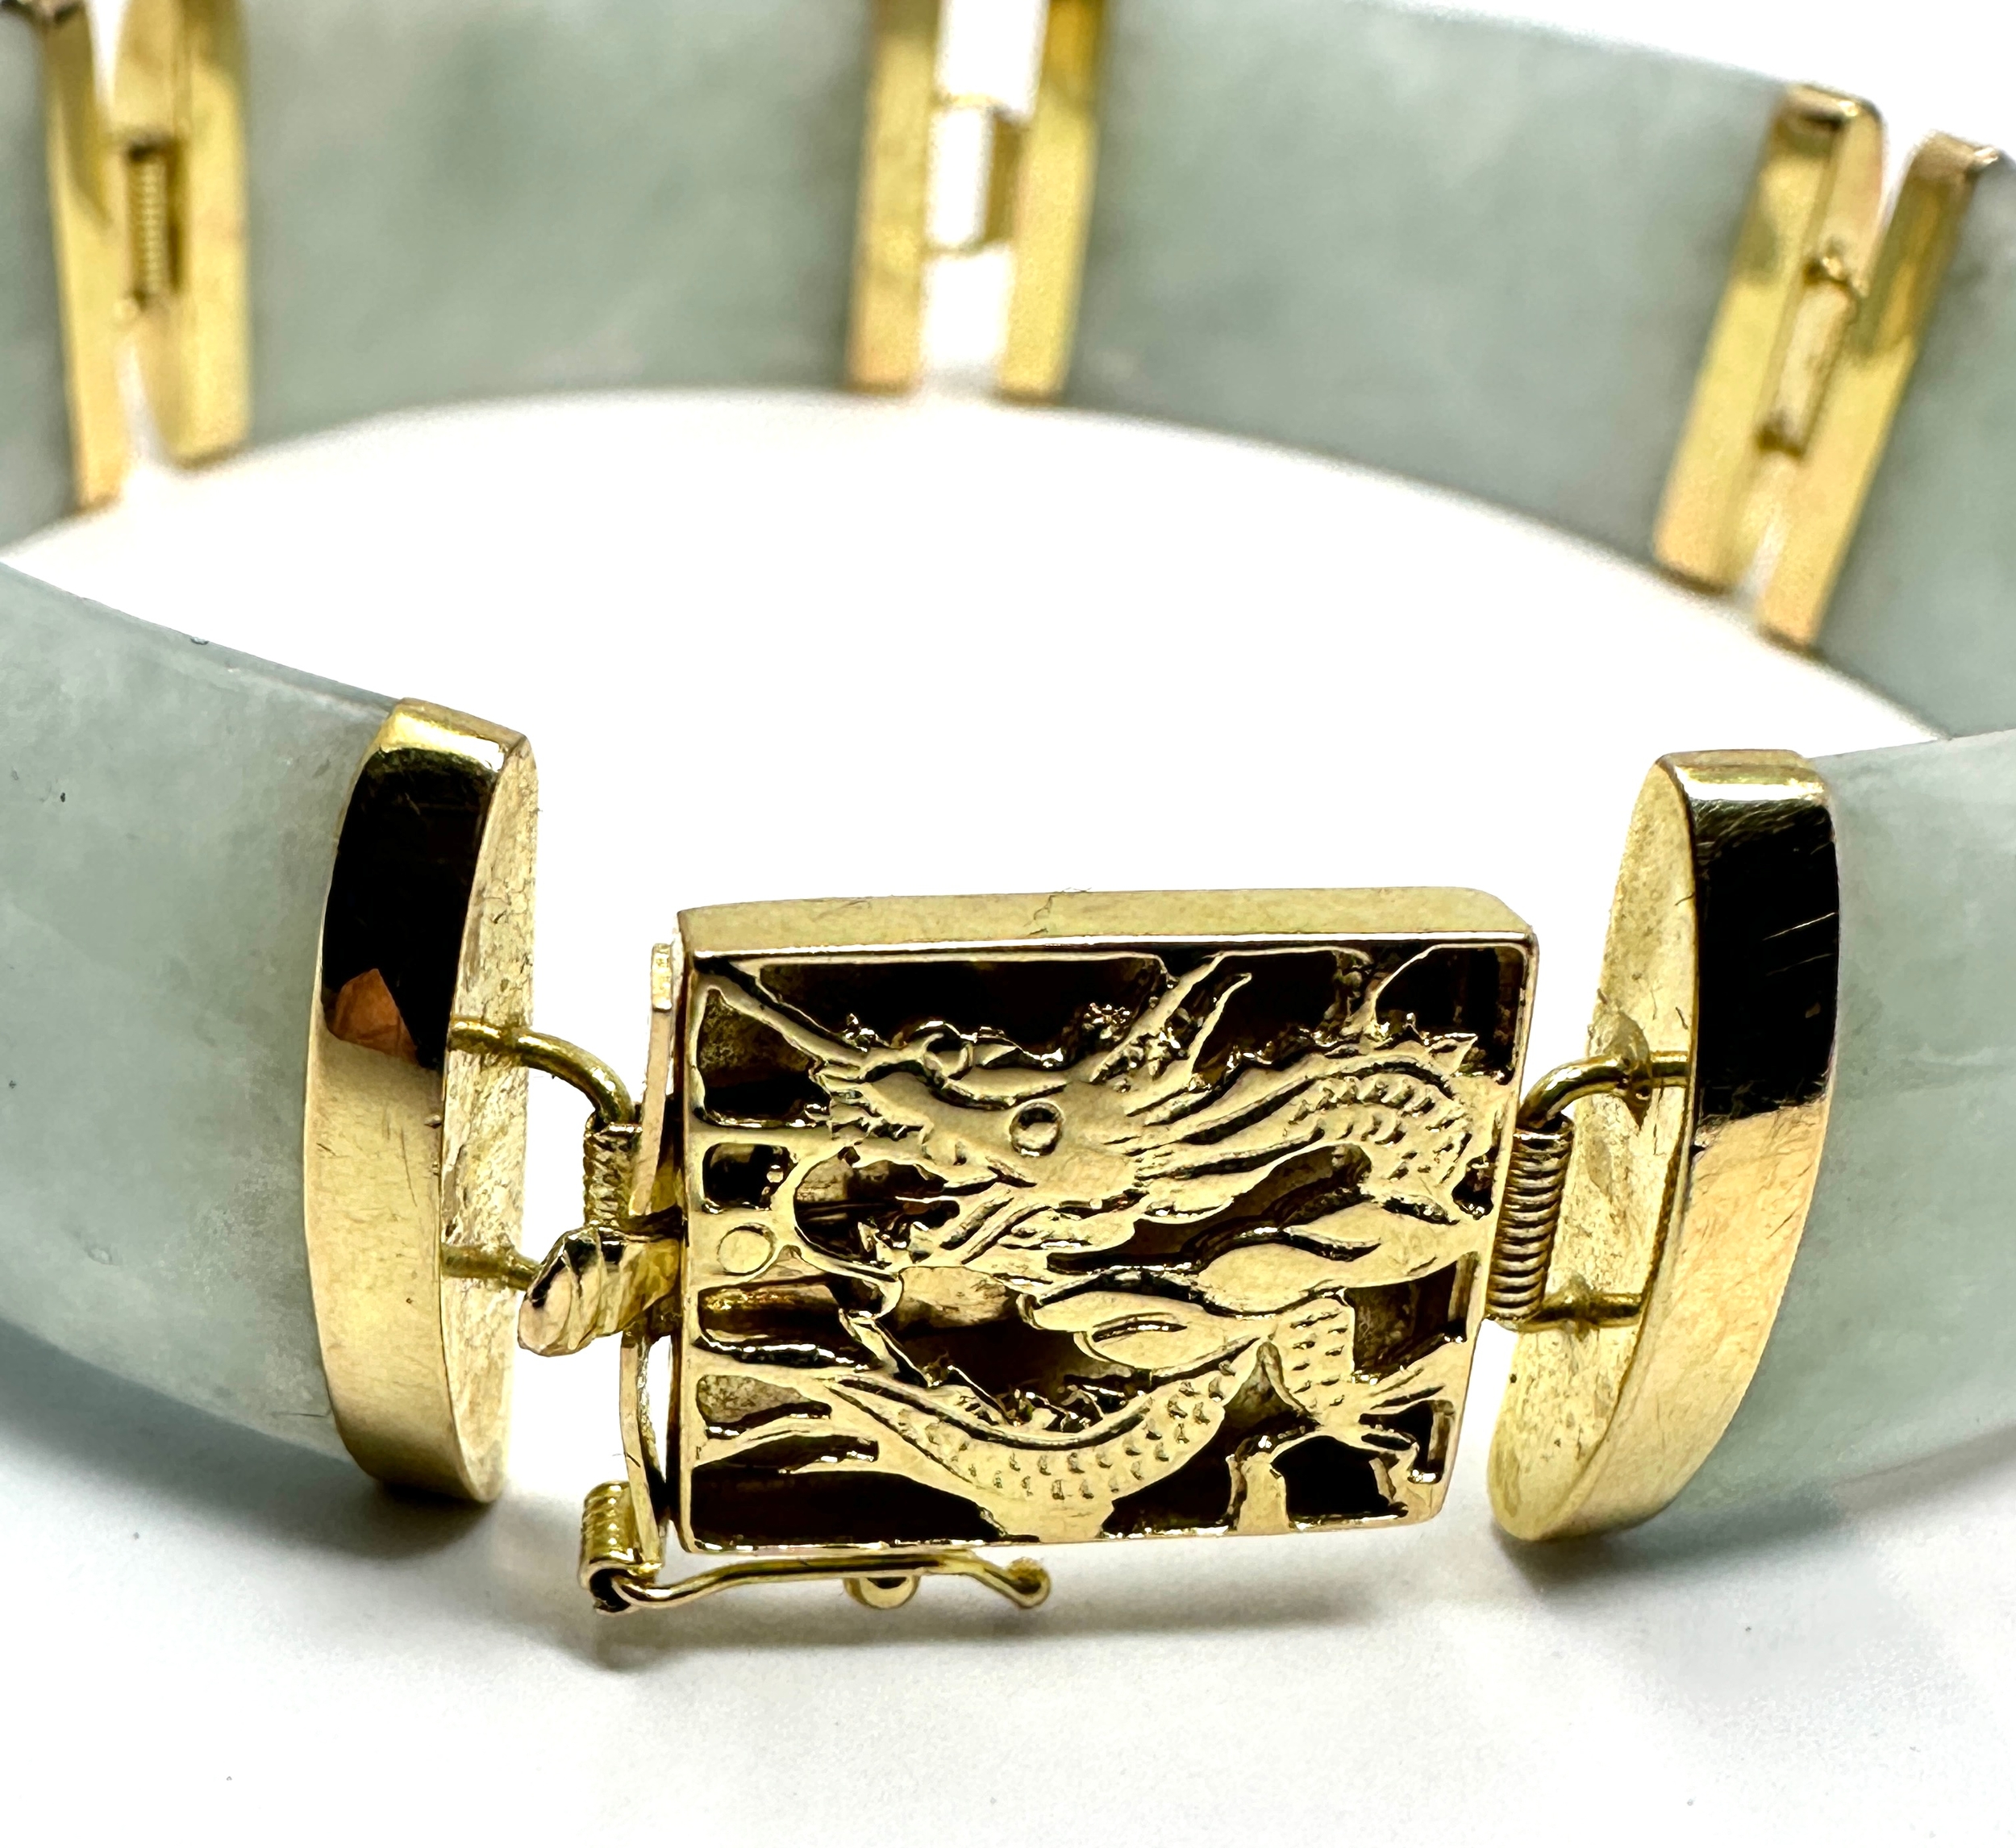 Chinese 14ct gold & jade bracelet jade panels with 14ct gold mounts clasp has dragen details - Image 2 of 4